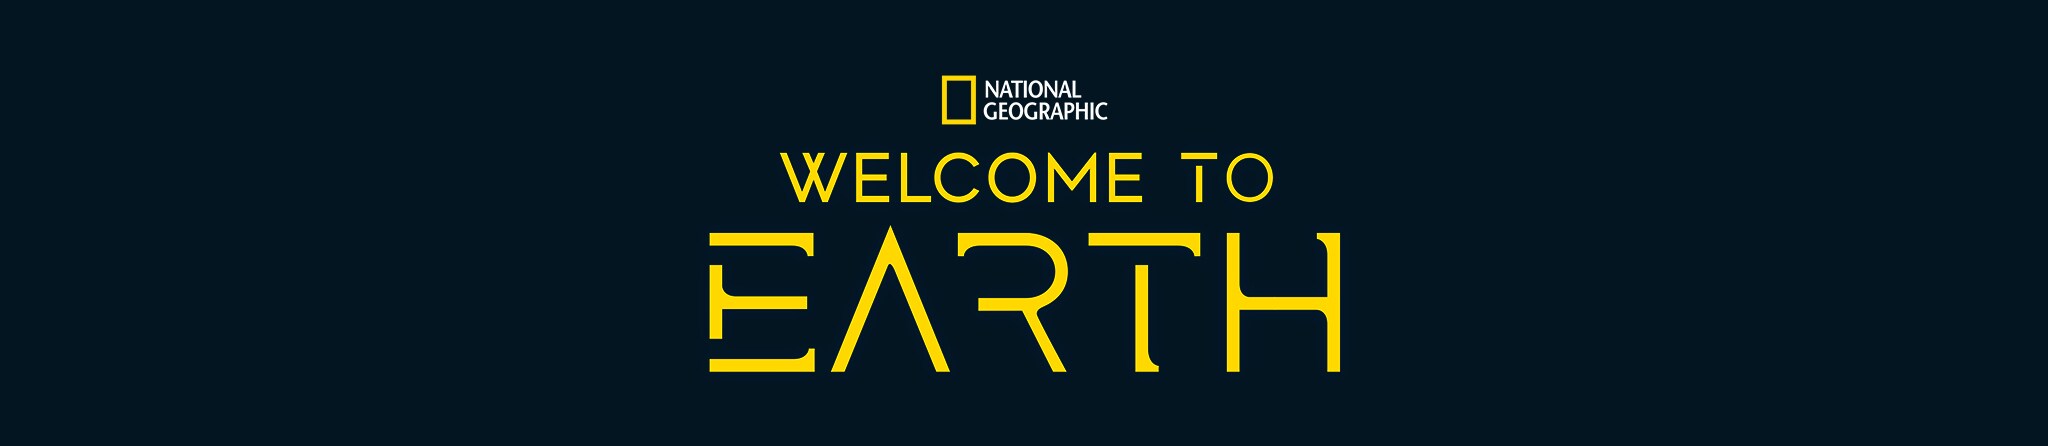 National Geographic | Welcome to Earth